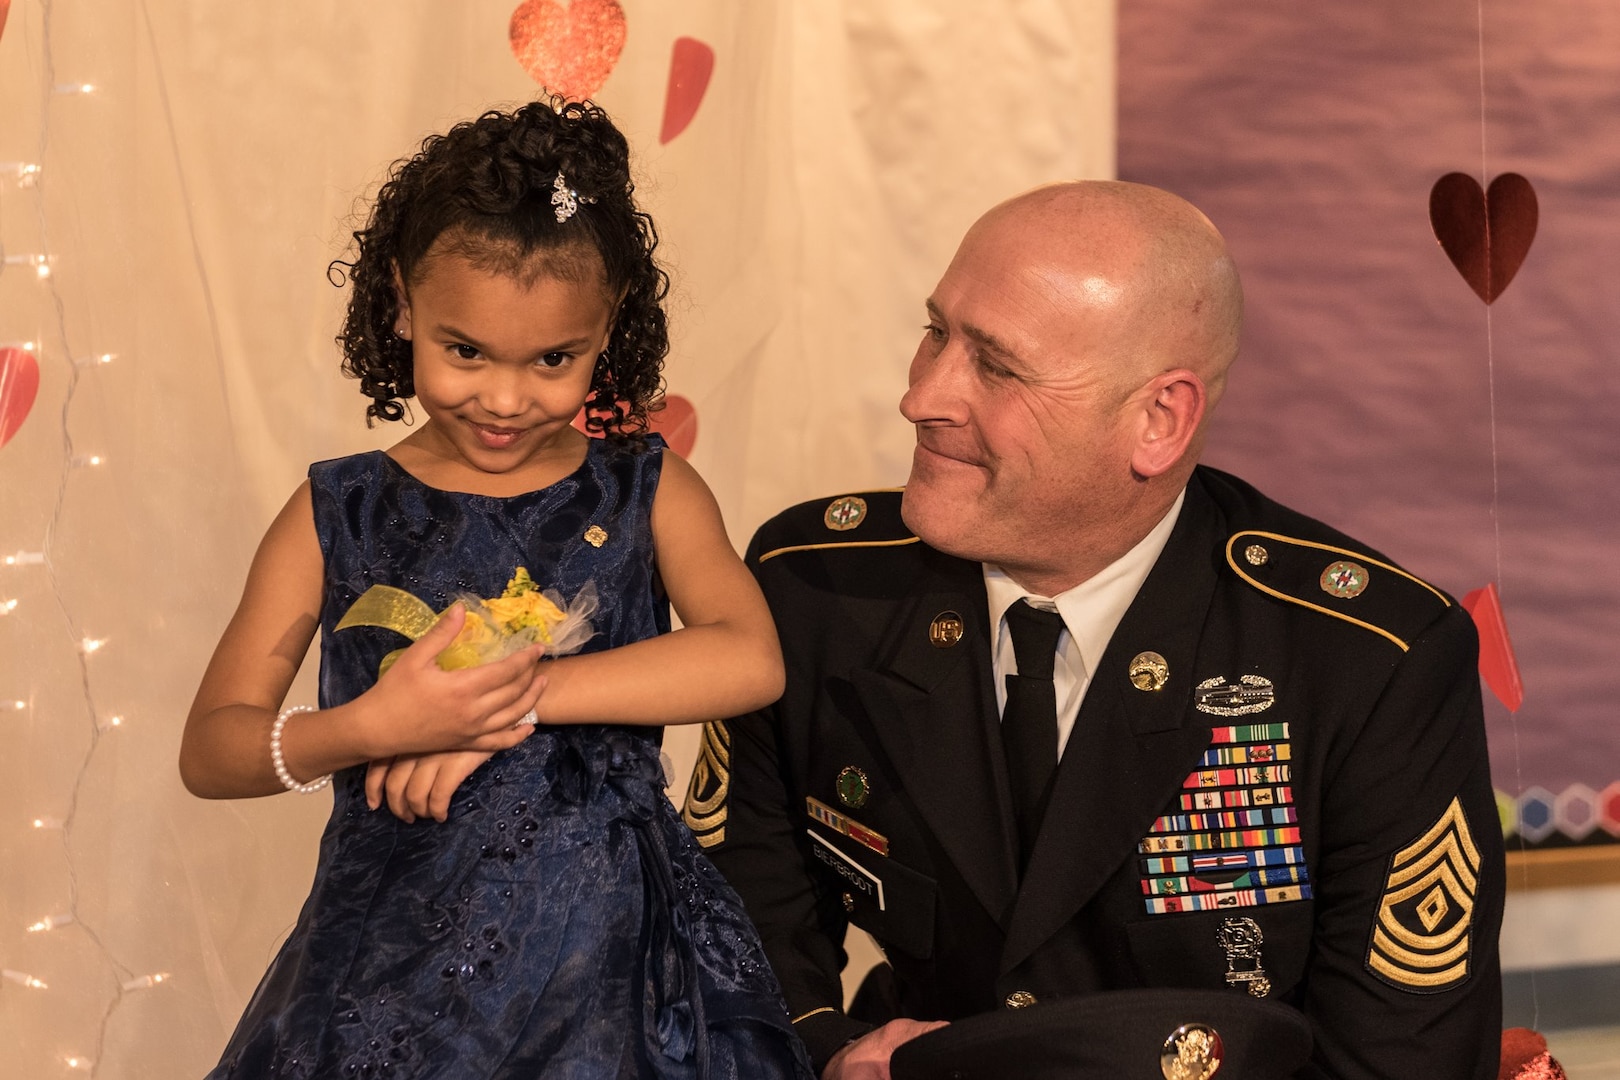 1st Sgt. Joseph Bierbrodt of Sheridan, Illinois, with the 933rd Military Police Company, smiles at Cayleigh Hinton just before escorting her into the father-daughter dance at the Our Lady of Humility School in Beach Park, Illinois